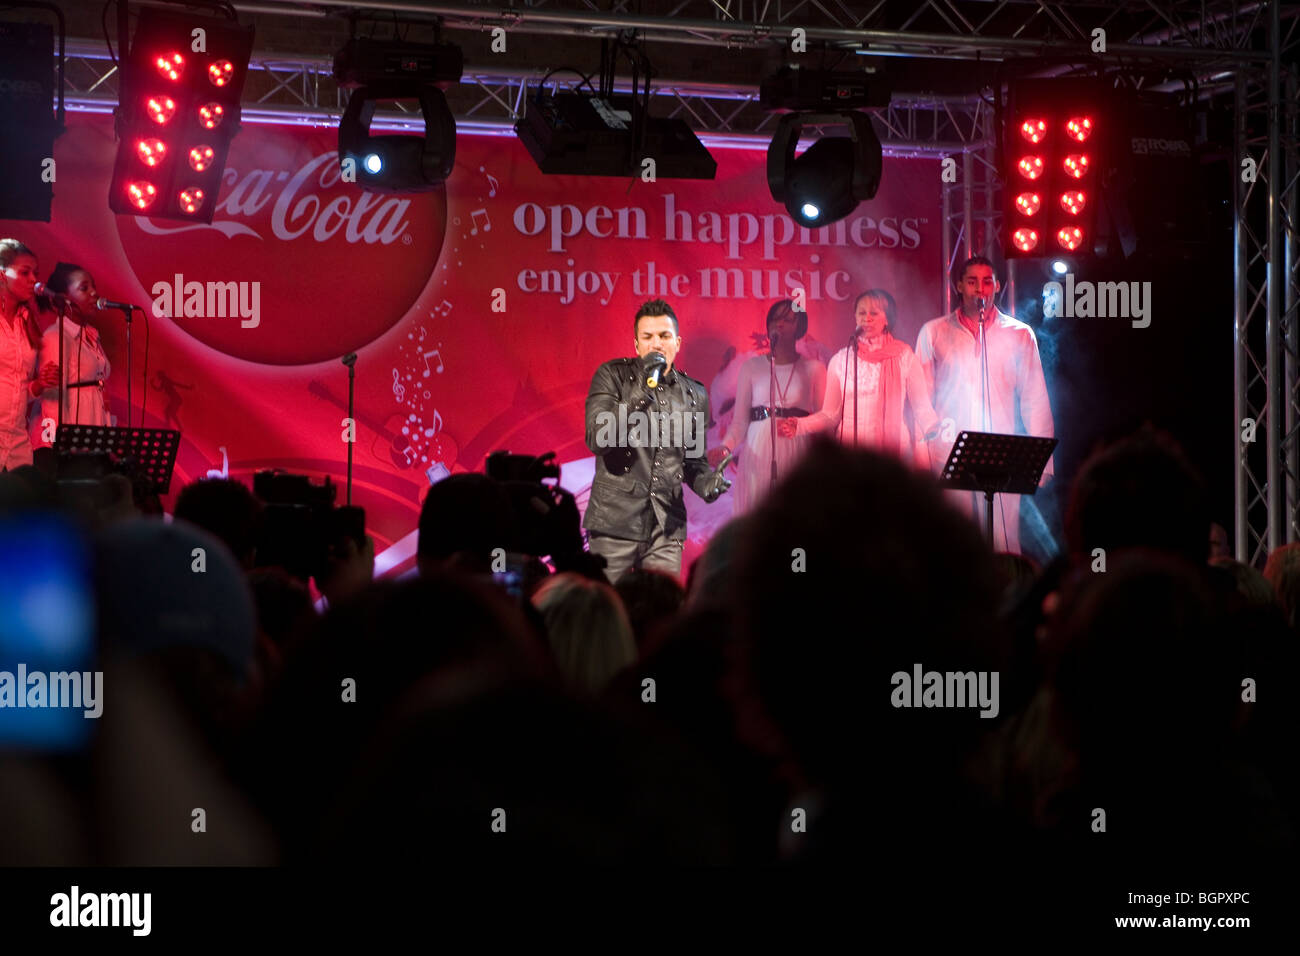 Pop Star singer Peter Andre performing at Old Spitalfields London, England, Britain, UK. Stock Photo